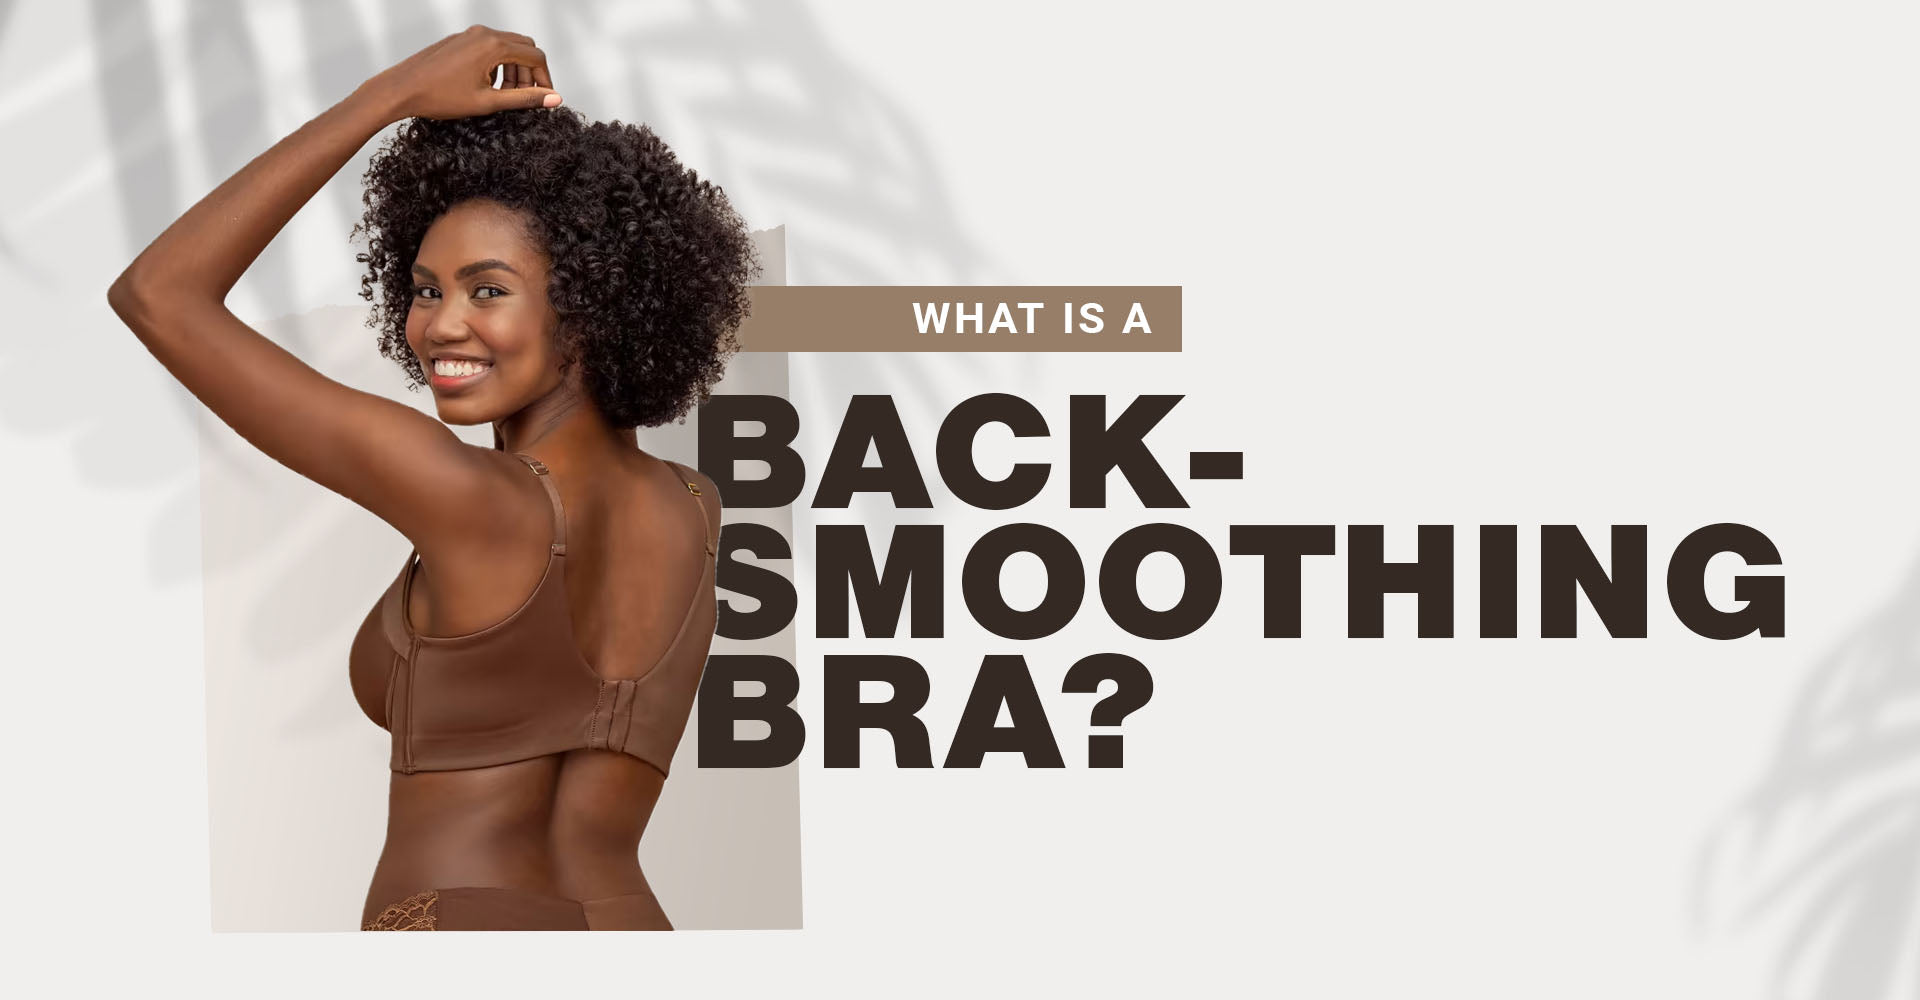 https://cdn.shopify.com/s/files/1/0565/6254/8868/files/What_Is_a_Back-Smoothing_Bra_1920x1000_f76a8de7-94aa-4fd3-88e0-858cc01ccb23.jpg?v=1678372375